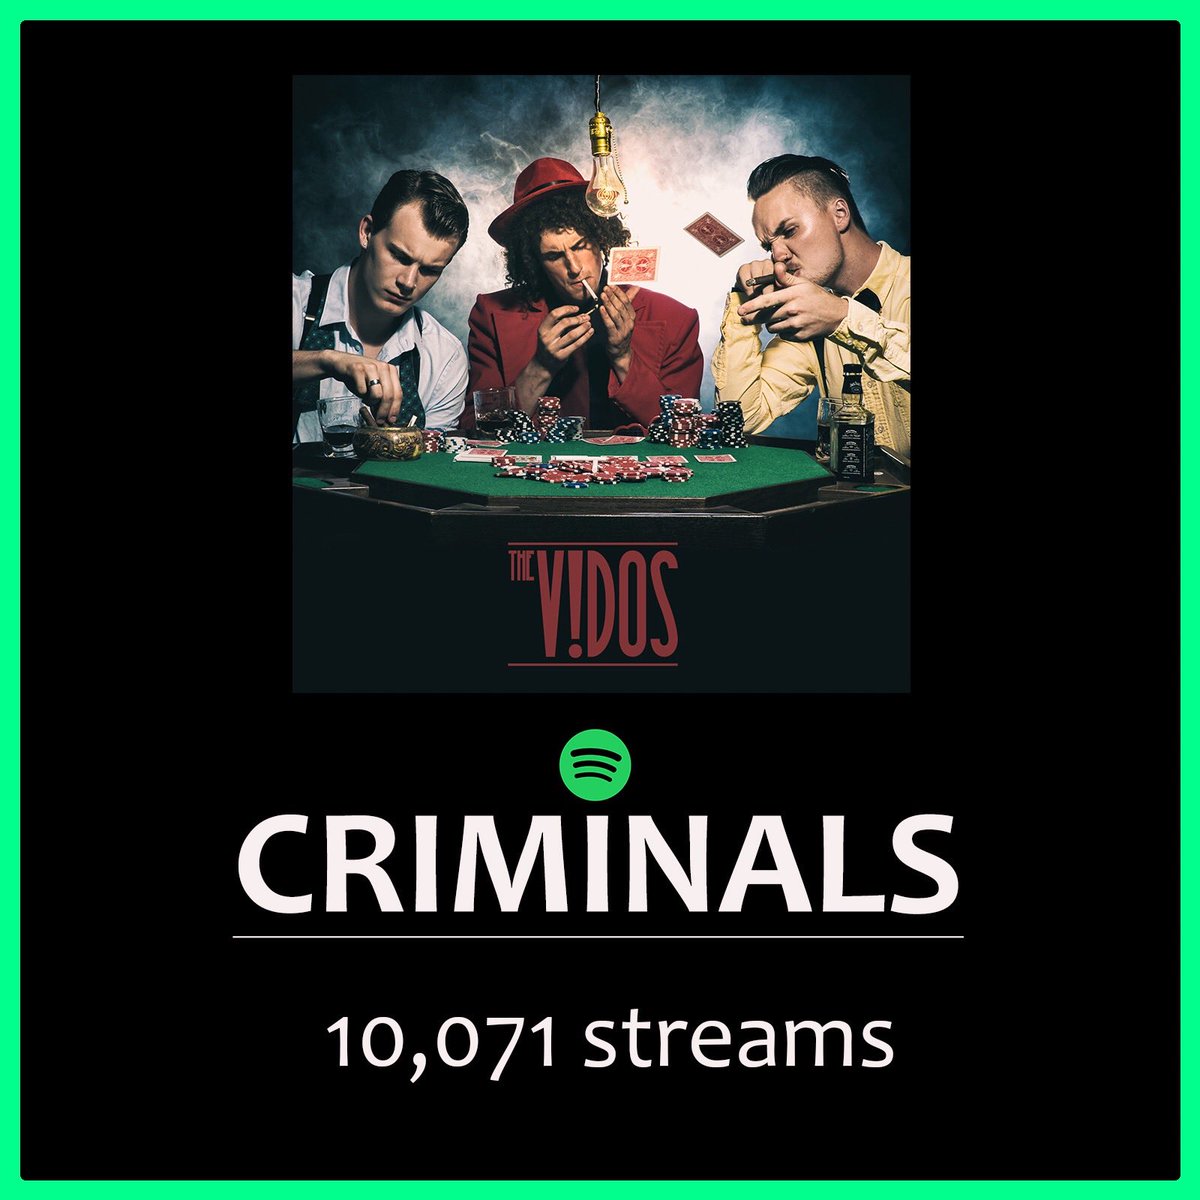 Over 10,000 spins for month #1 of ♠️CRIMINALS♦️on @spotify!! Thank you ALL for your support! 
Link in bio: 👉
.
.
.

@SpotifyCanada #spotify #thevidos #criminals #poker #playlist #musicmonday #music #musically #musicnews #ears #rock #rockmusic #art #guitar #vancouver #canada